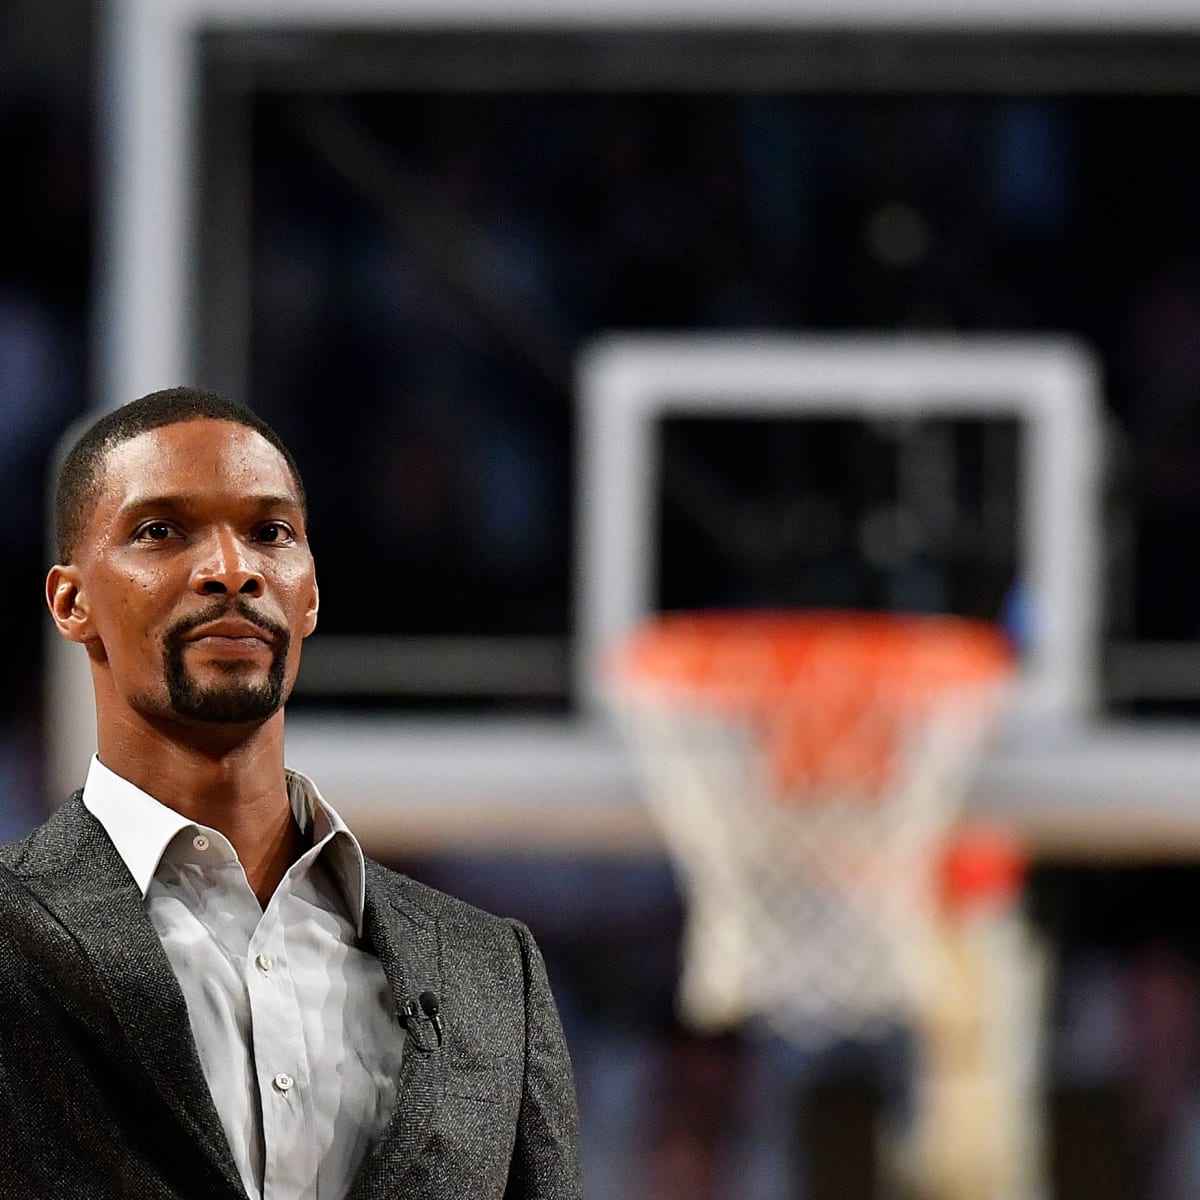 Chris Bosh has Miami Heat jersey retired during halftime ceremony